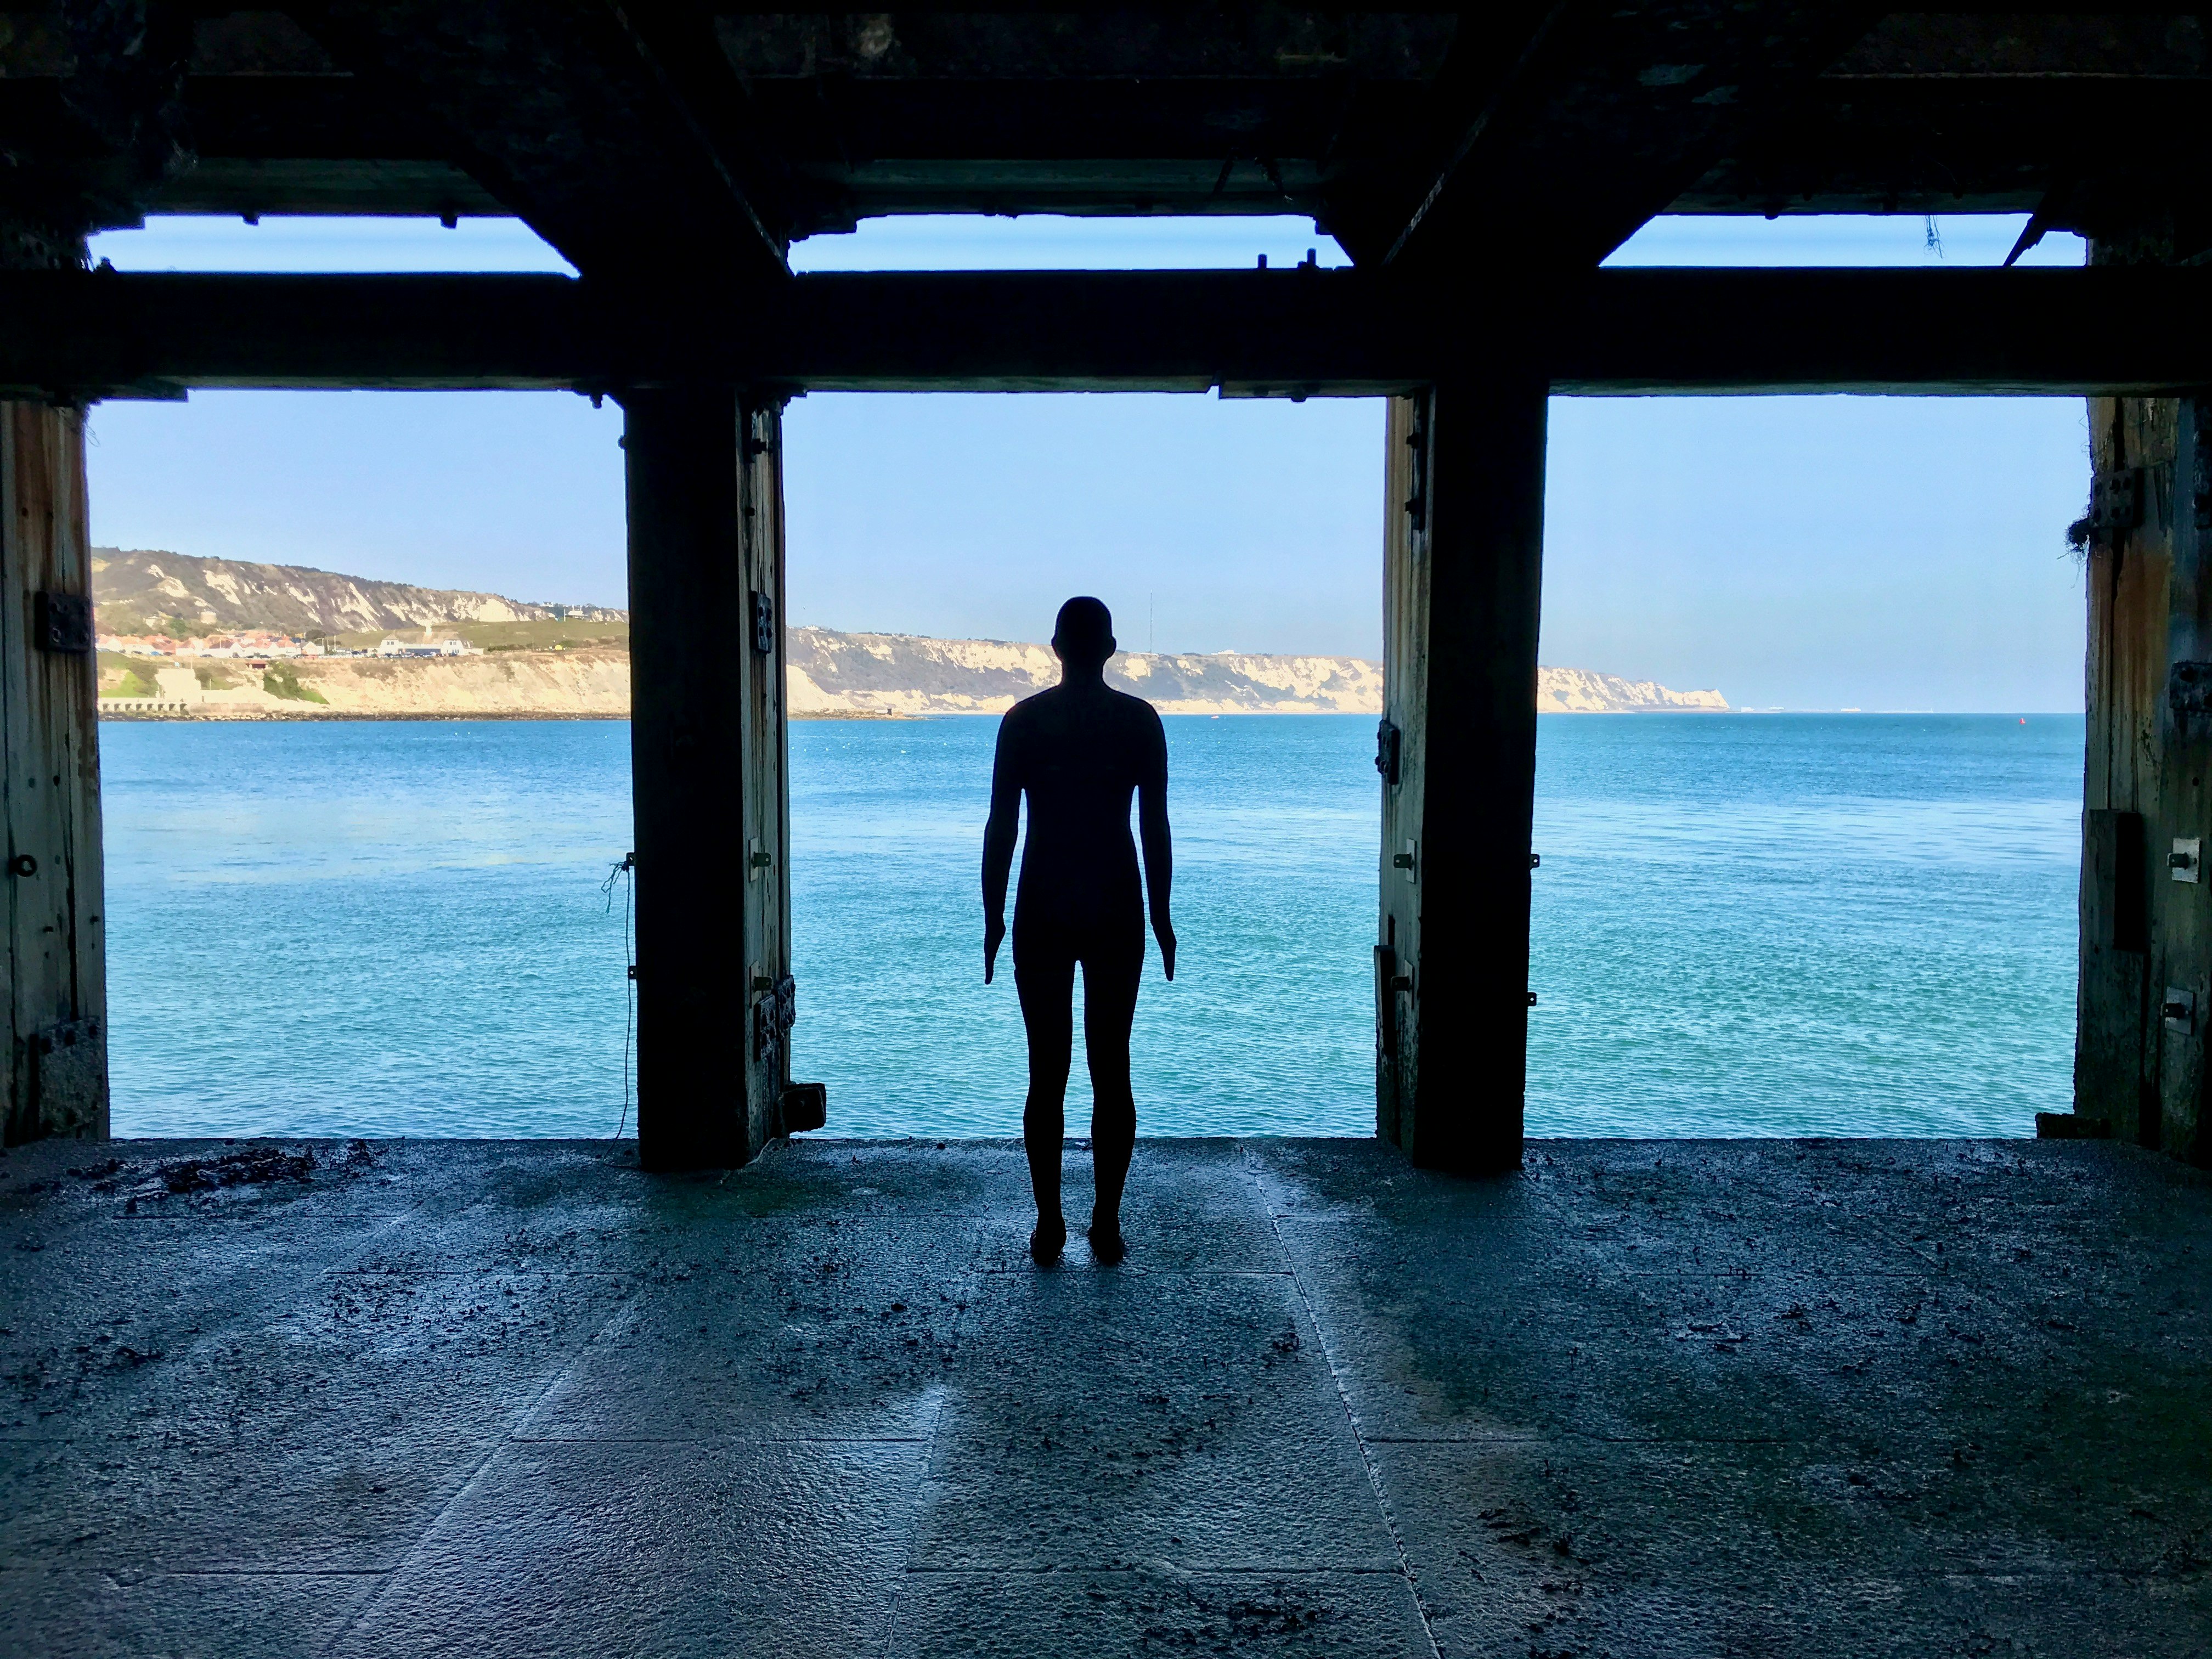 A cast iron figure by sculptor Antony Gormley stands in a shell of a building, looking out upon cliffs and the sea in Folkestone.